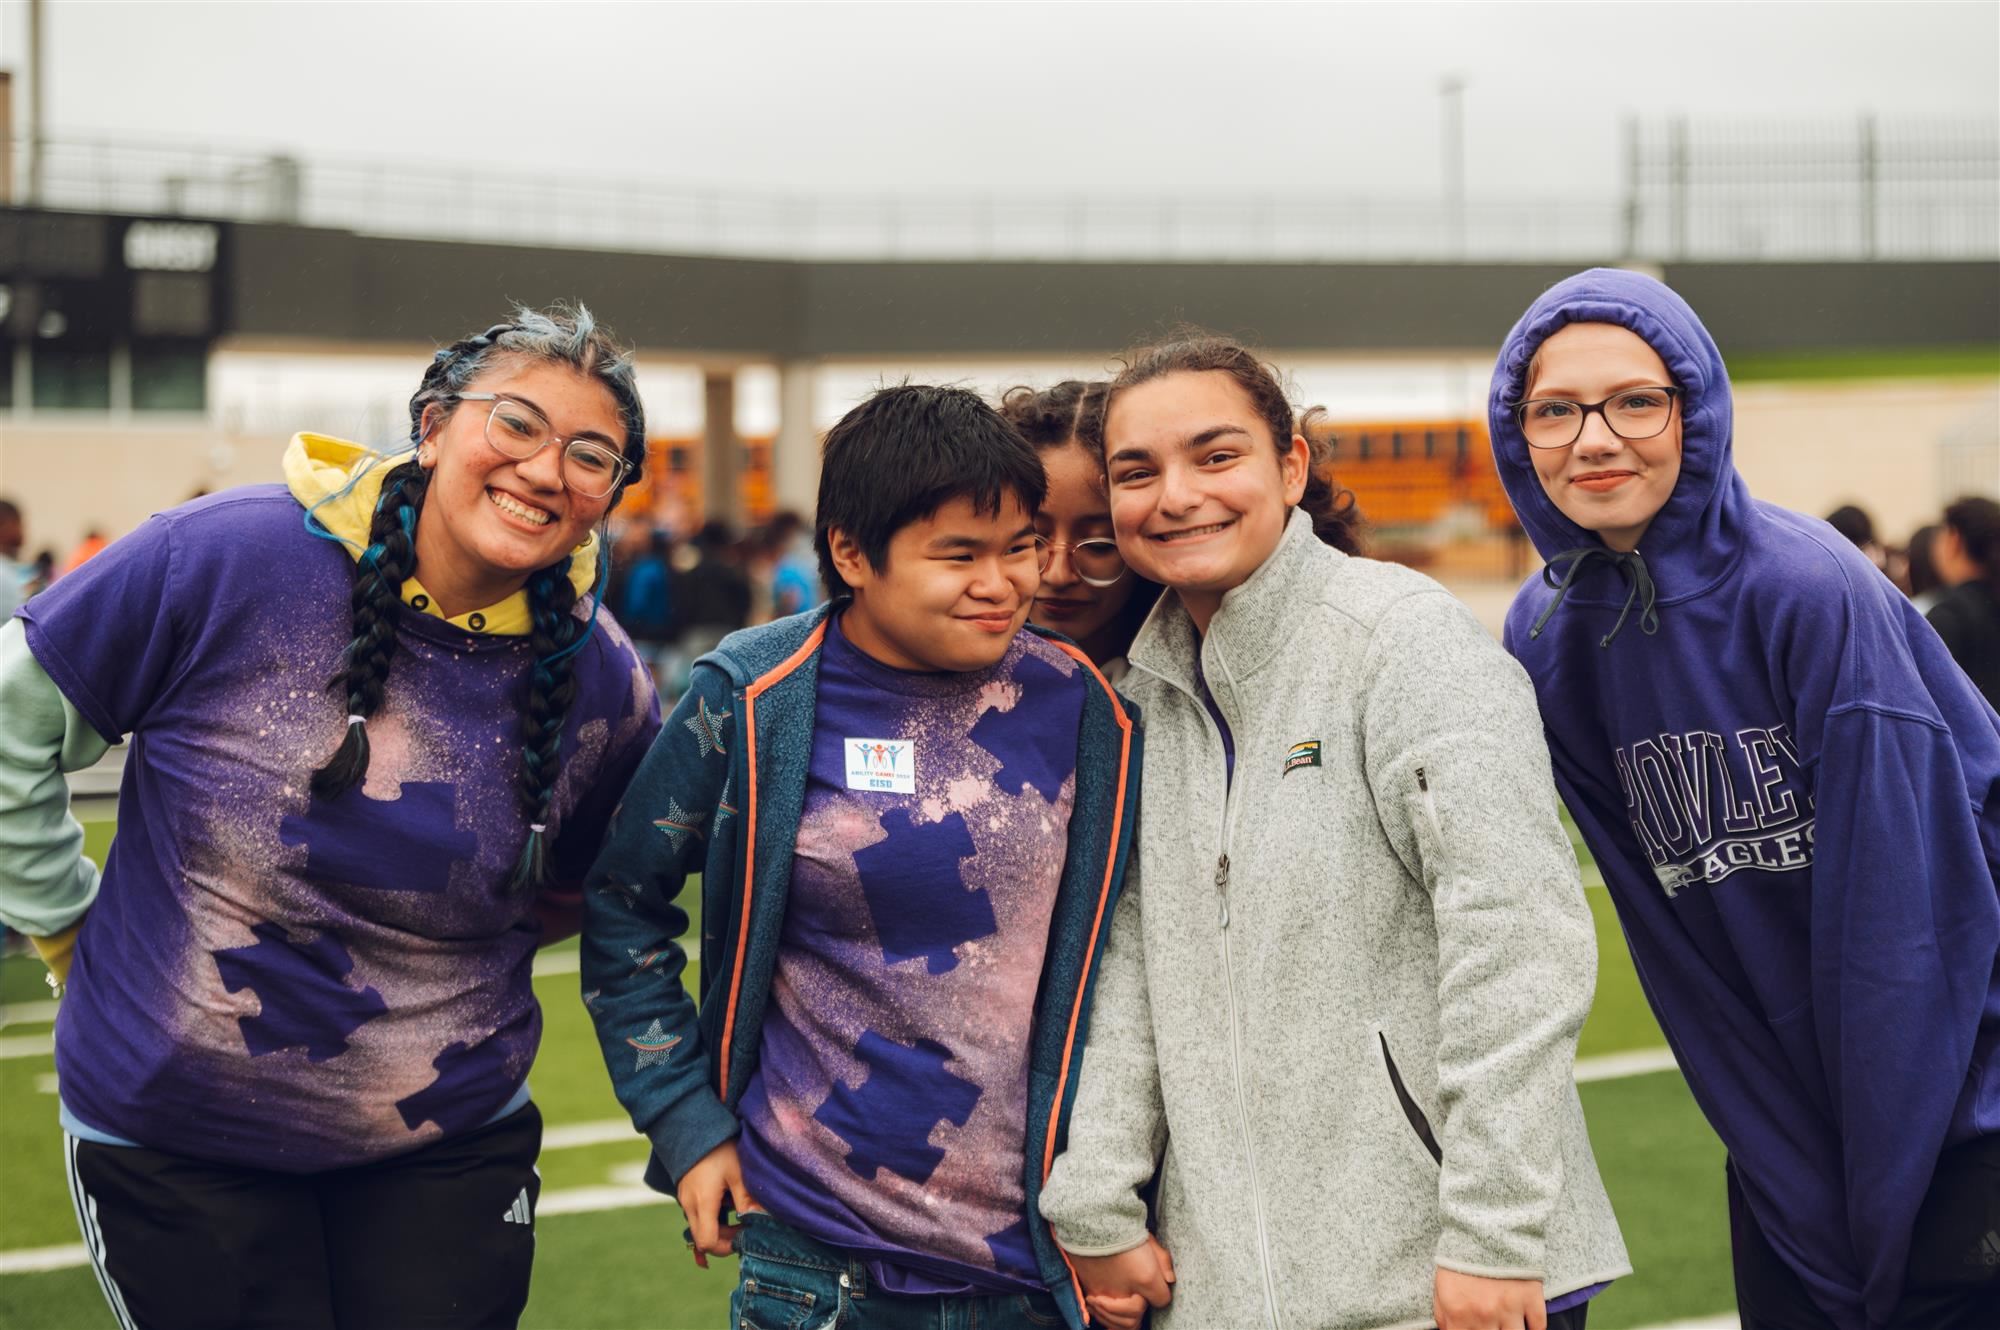 Students smiling at Ability Games